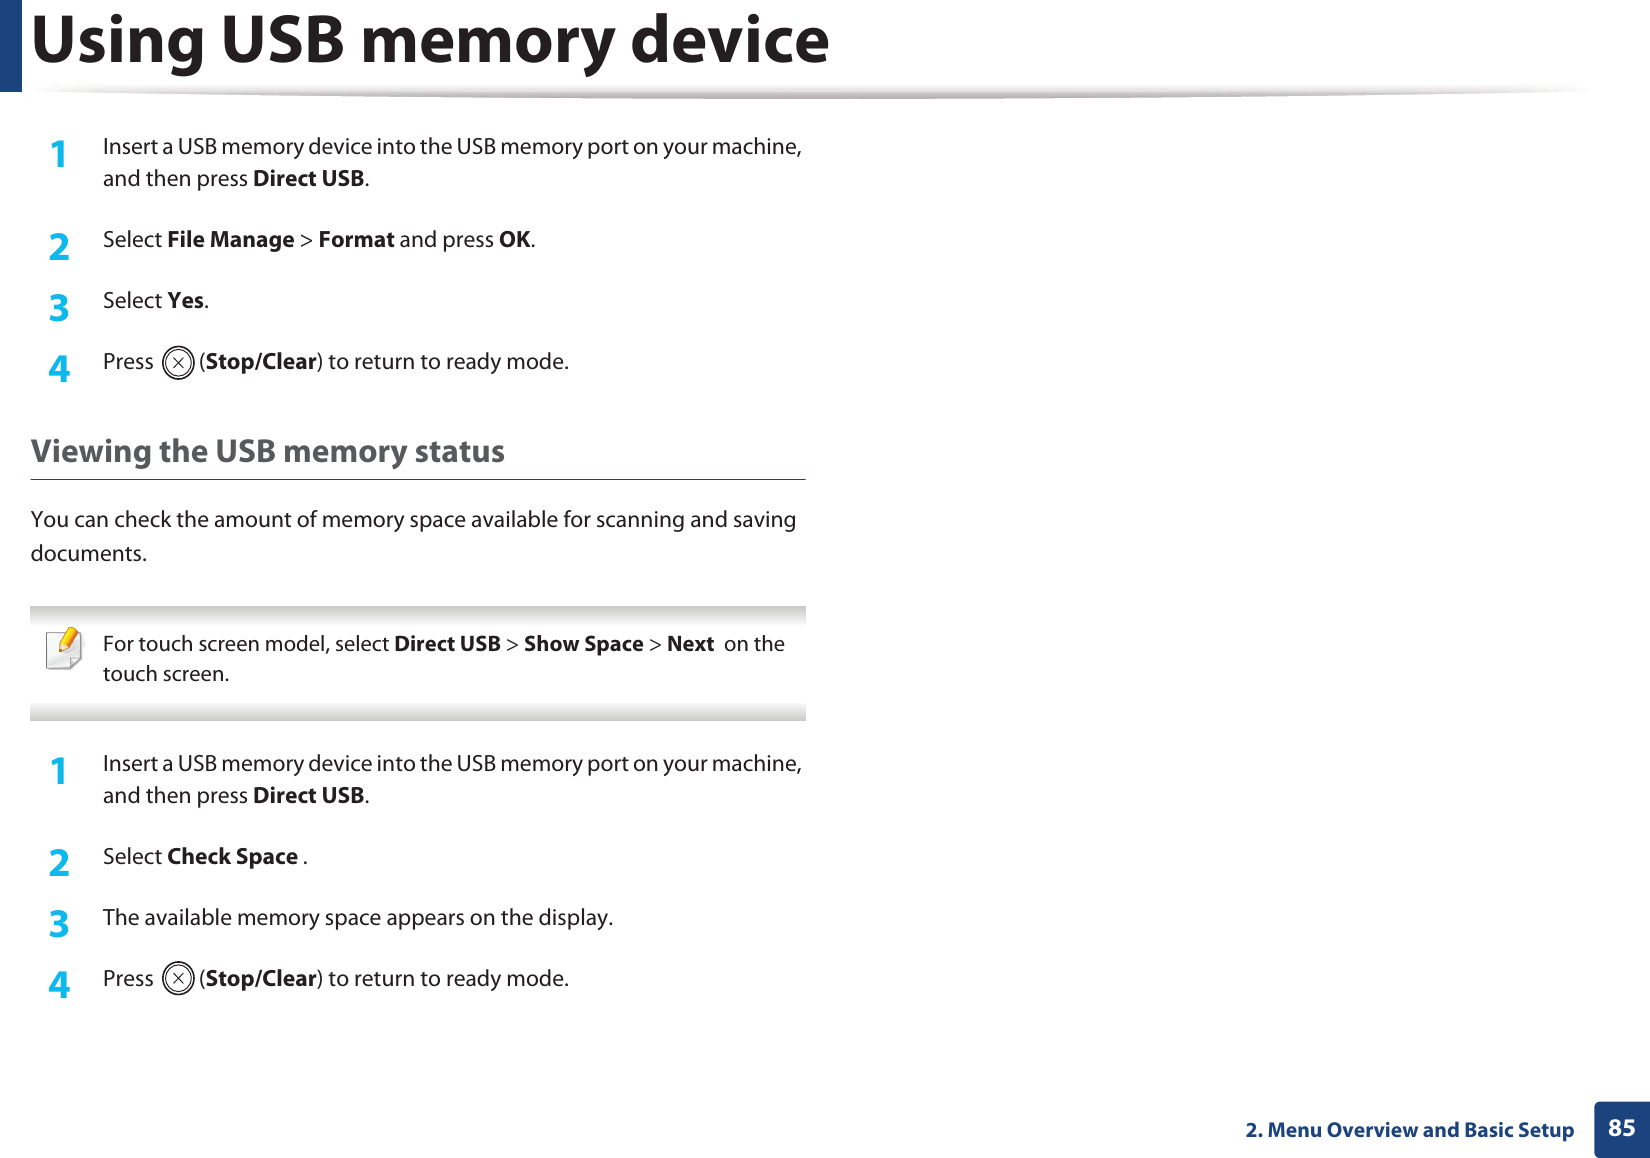 Using USB memory device852. Menu Overview and Basic Setup1Insert a USB memory device into the USB memory port on your machine, and then press Direct USB.2  Select File Manage &gt; Format and press OK.3  Select Yes.4  Press (Stop/Clear) to return to ready mode.Viewing the USB memory statusYou can check the amount of memory space available for scanning and saving documents. For touch screen model, select Direct USB &gt; Show Space &gt; Next  on the touch screen. 1Insert a USB memory device into the USB memory port on your machine, and then press Direct USB.2  Select Check Space .3  The available memory space appears on the display.4  Press (Stop/Clear) to return to ready mode.